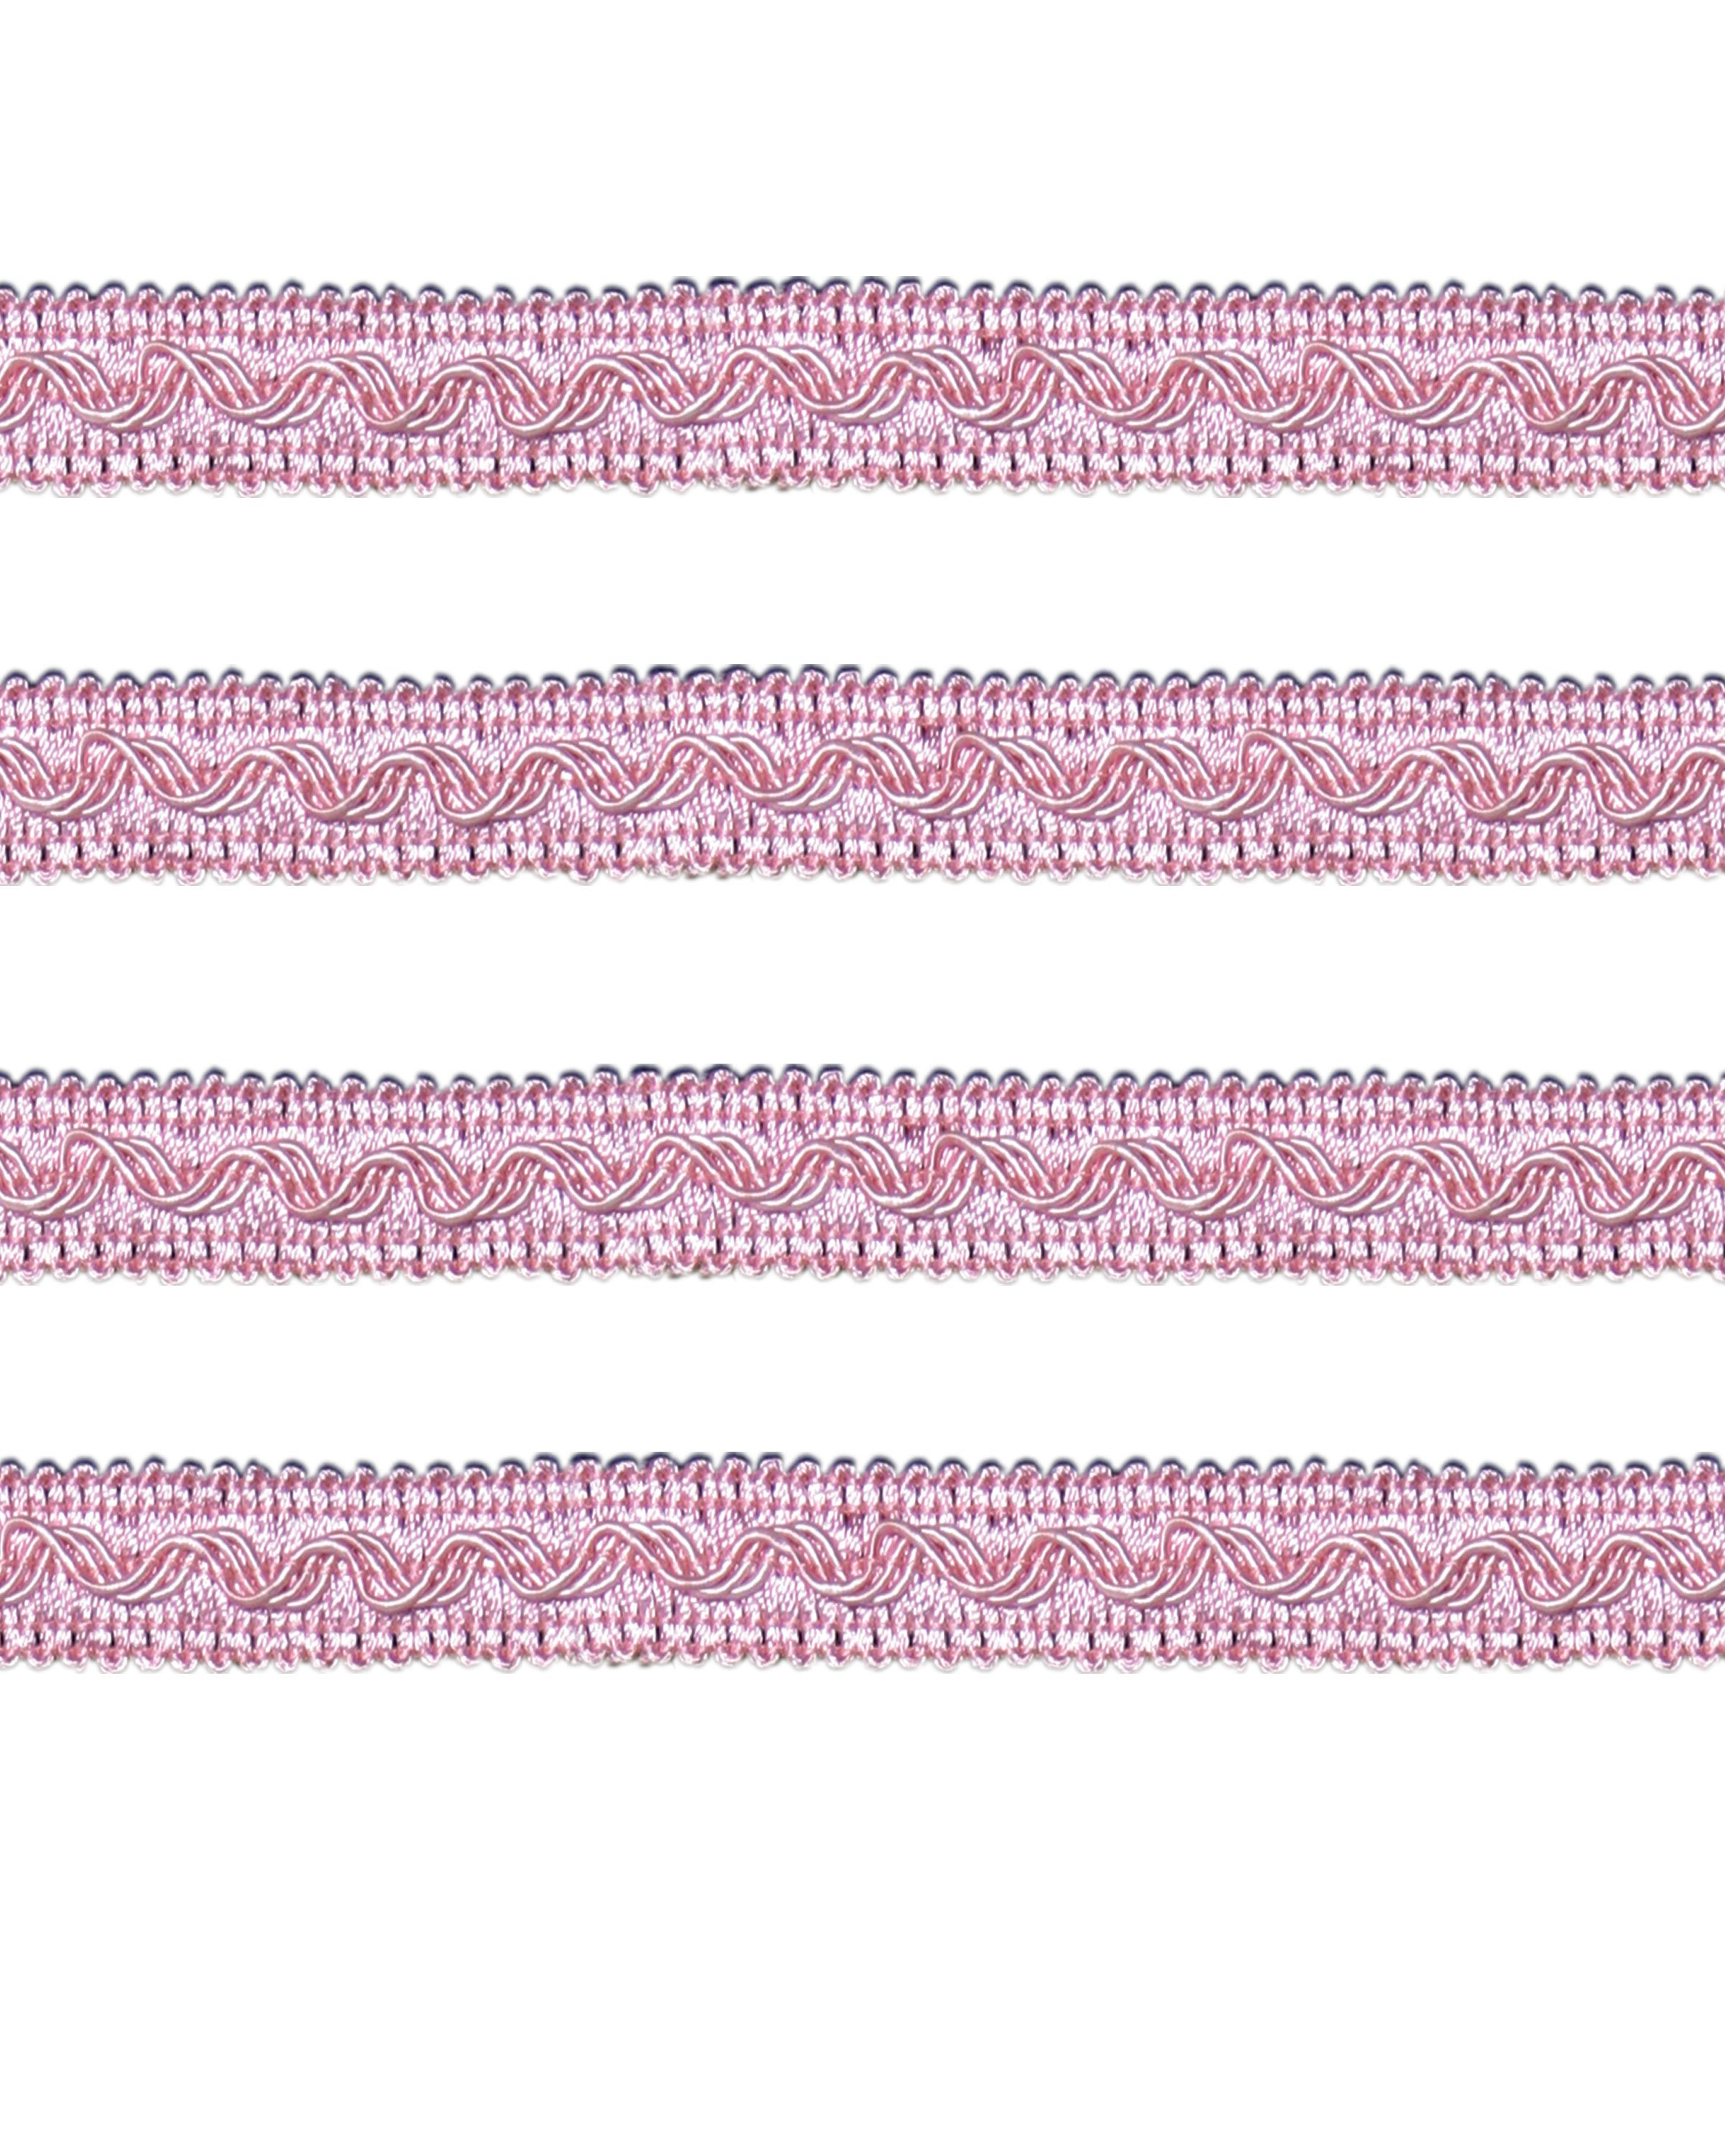 Small Fancy Braid - Dusky Pink 17mm Price is for 5 metres